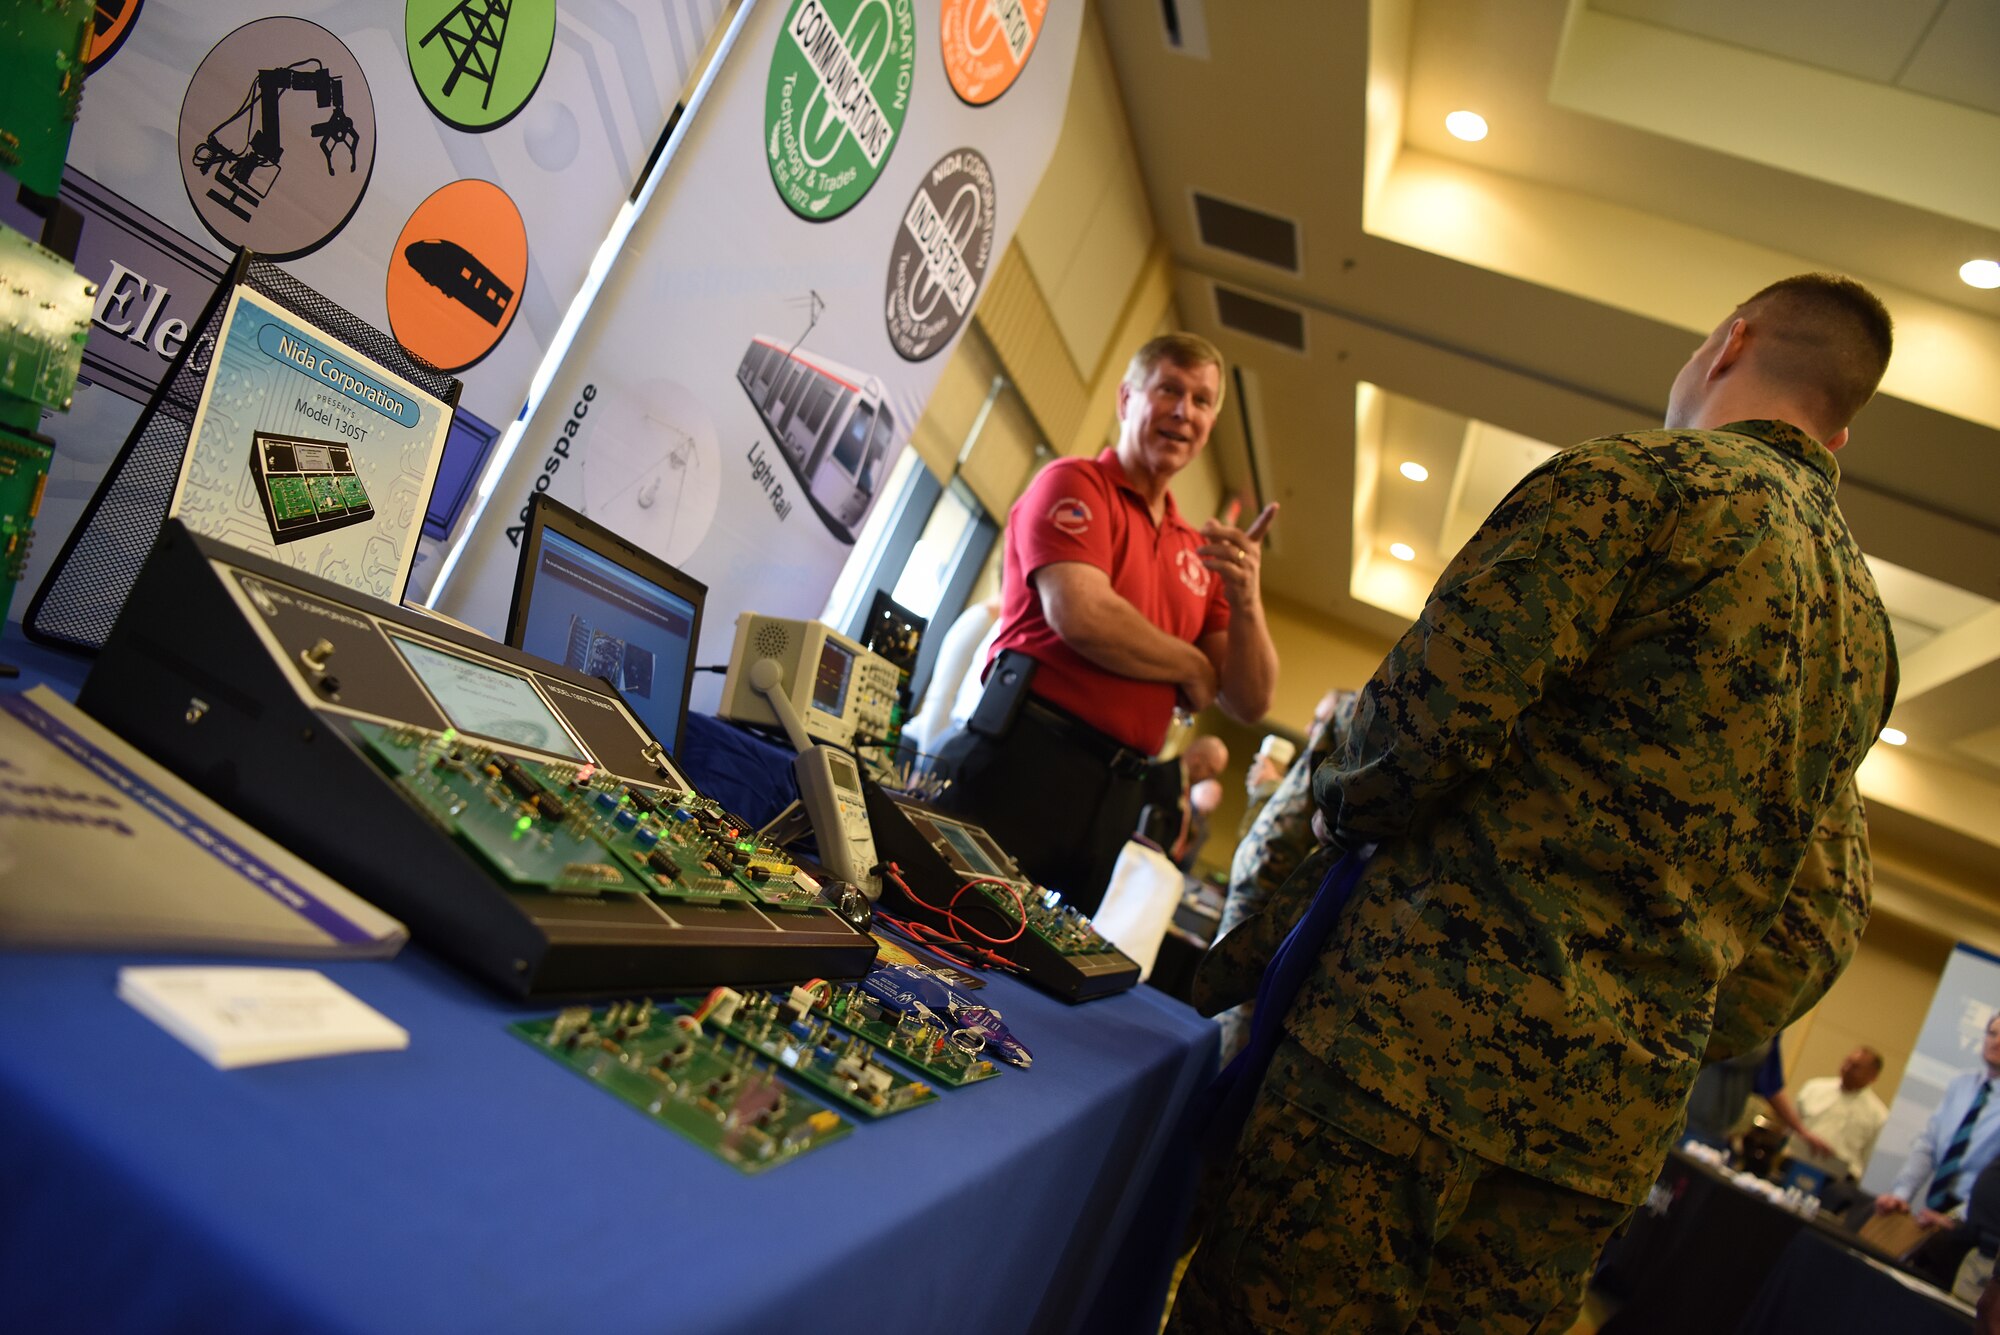 Jana Asplund, Nida Corporation Technical Specialist, talks to Keesler Marine Detachment Marines about products during the 2018 Keesler Technology Expo at the Bay Breeze Event Center Feb. 27, 2018, on Keesler Air Force Base, Mississippi. The expo was hosted by the 81st Communications Squadron and was free to all Defense Department, government and contractor personnel with base access. The event was held to introduce military members to the latest in technological advancements to bolster the Air Force’s capabilities in national defense. (U.S. Air Force photo by Airman 1st Class Suzanna Plotnikov)